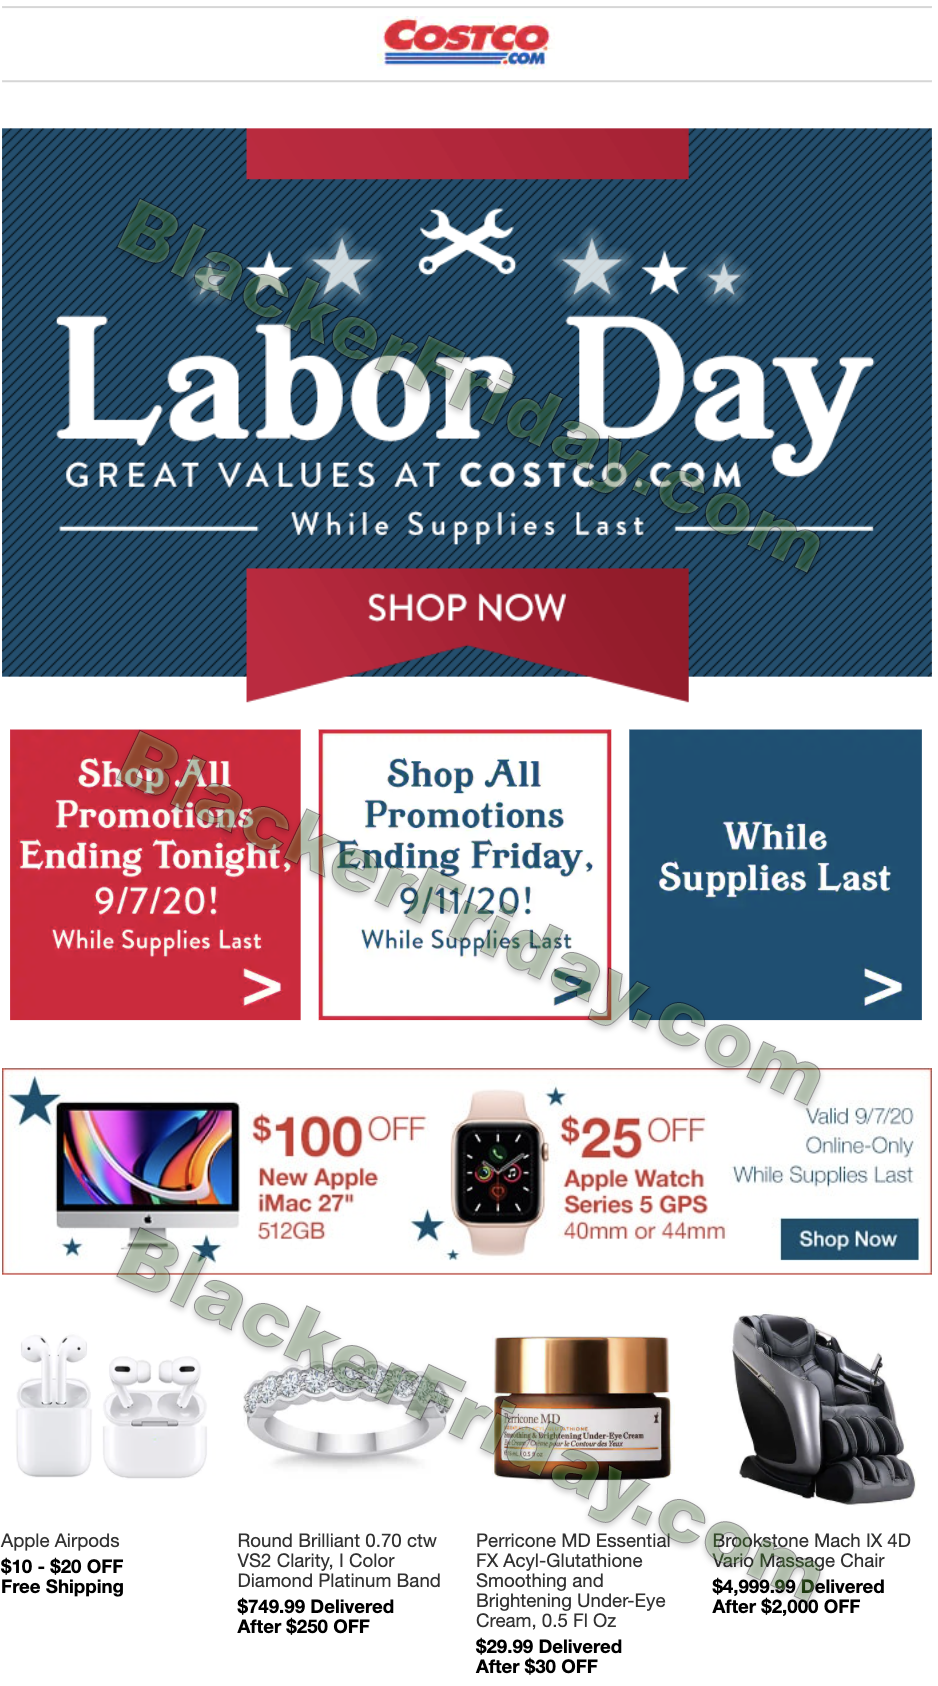 Costco Labor Day Sale 2021 What to Expect Blacker Friday